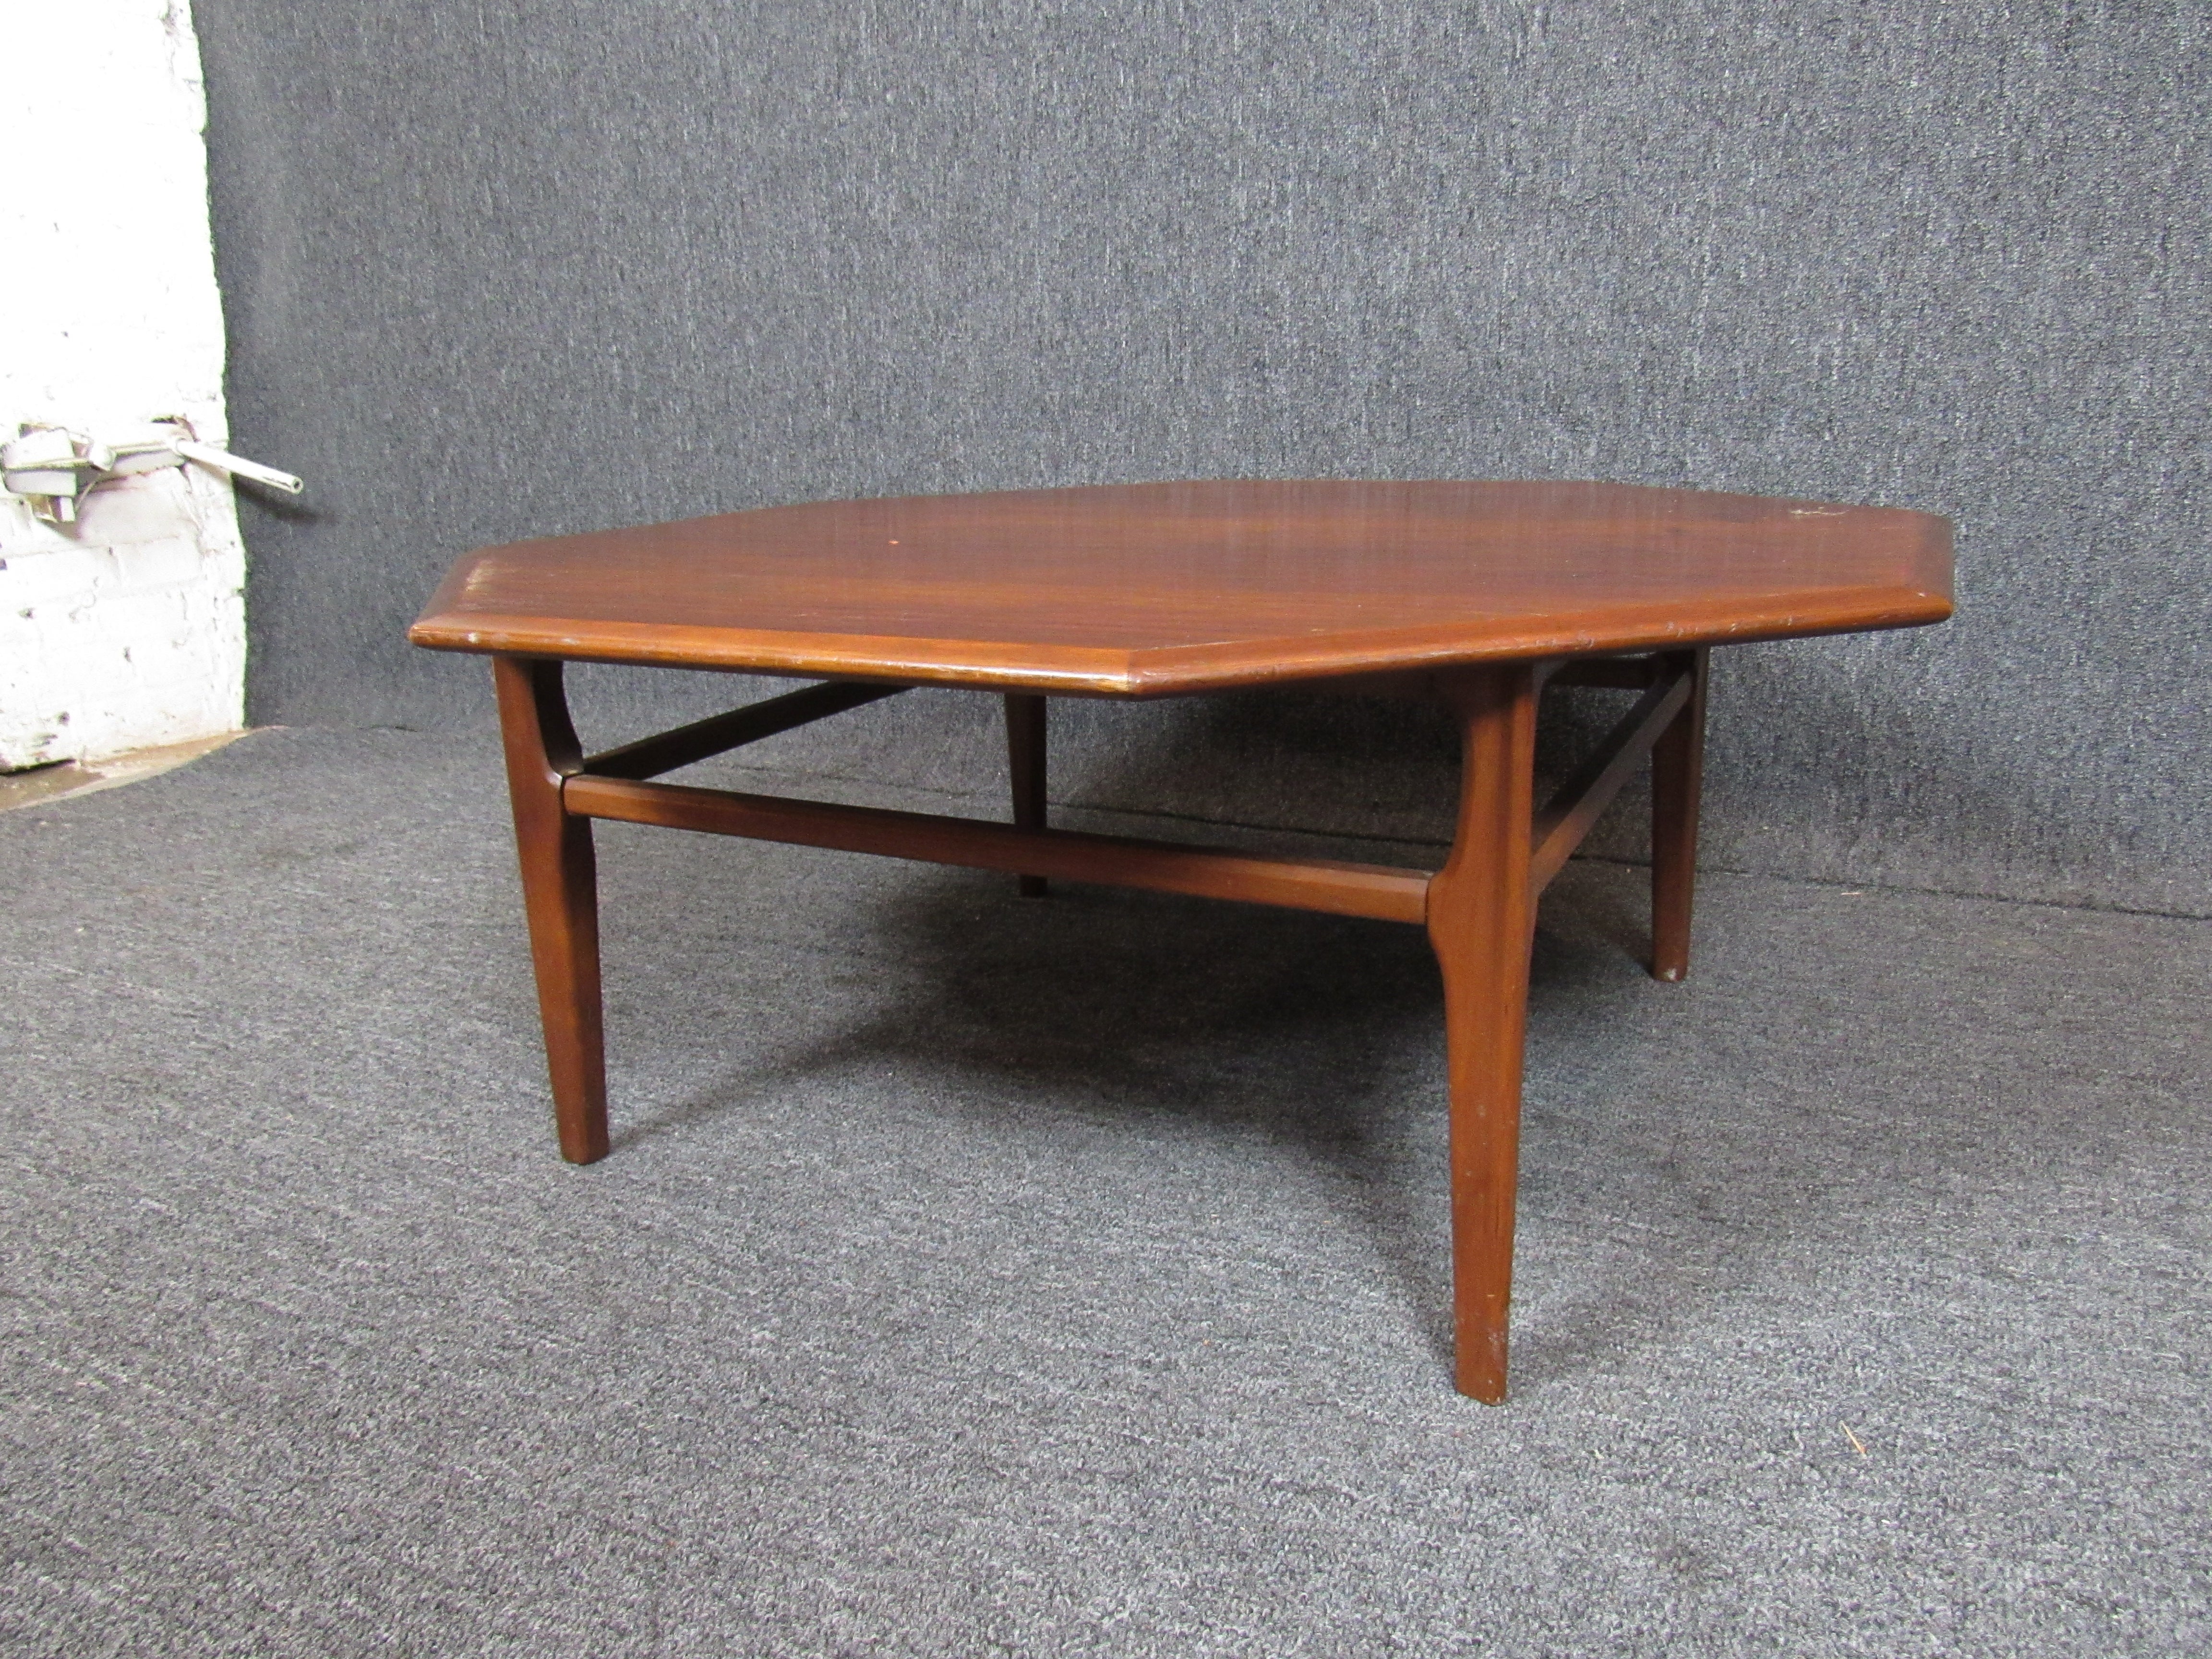 Nice mid-century table with a large octagonal top with plenty of room to kick up your feet and watch TV or to spread out the crossword puzzle alongside your morning coffee. Warm, wood finish that will compliment a wide variety of styles. (Please